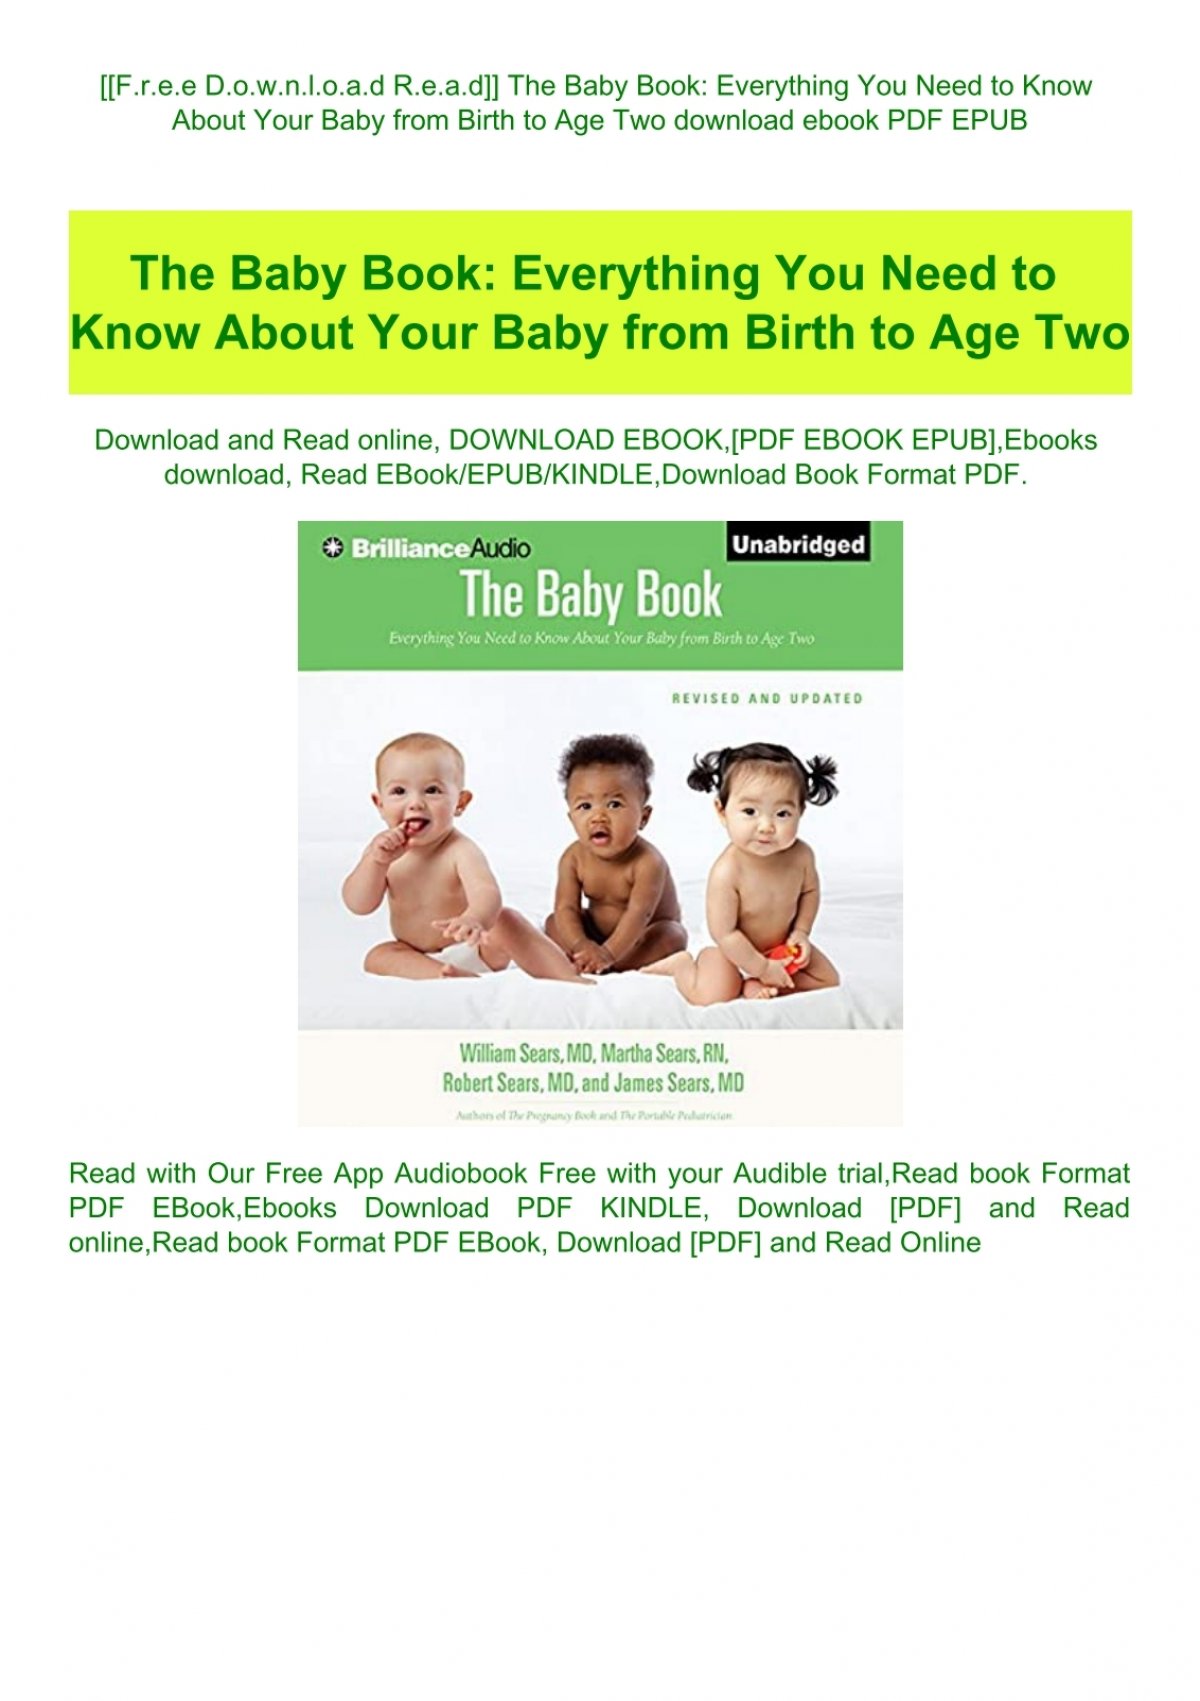 F R E E D O W N L O A D R E A D The Baby Book Everything You Need To Know About Your Baby From Birth To Age Two Download Ebook Pdf Epub